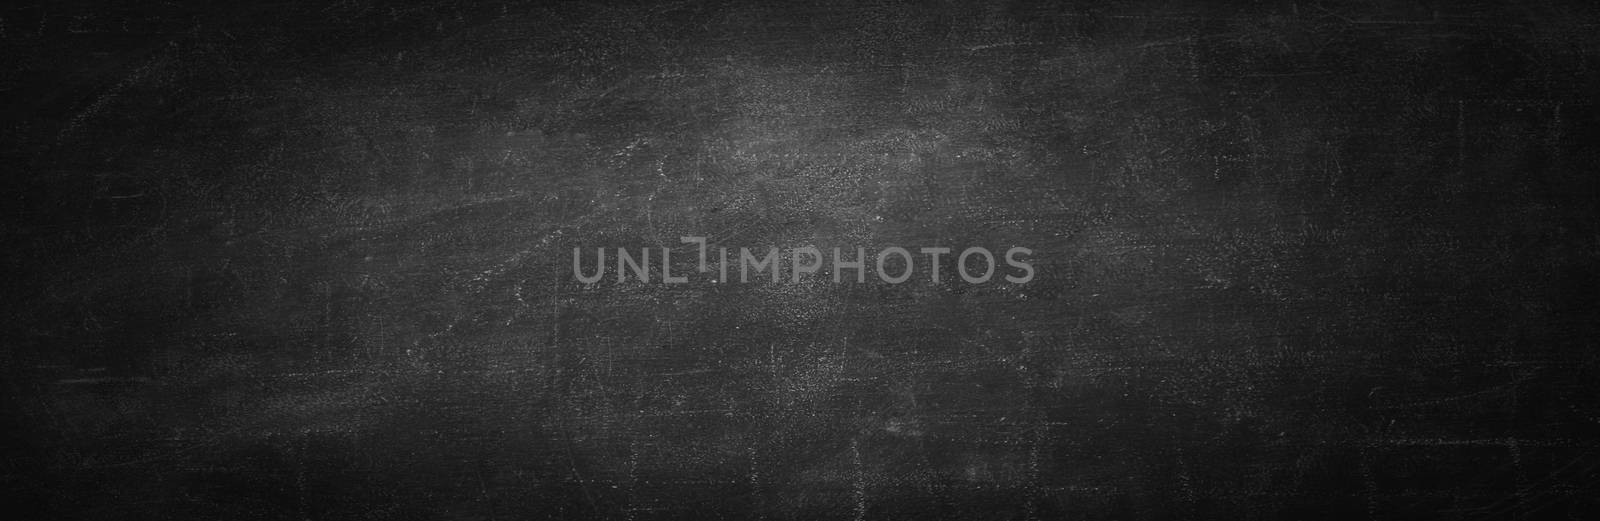 blackboard texture and black background, copy space horizontal w by ngad